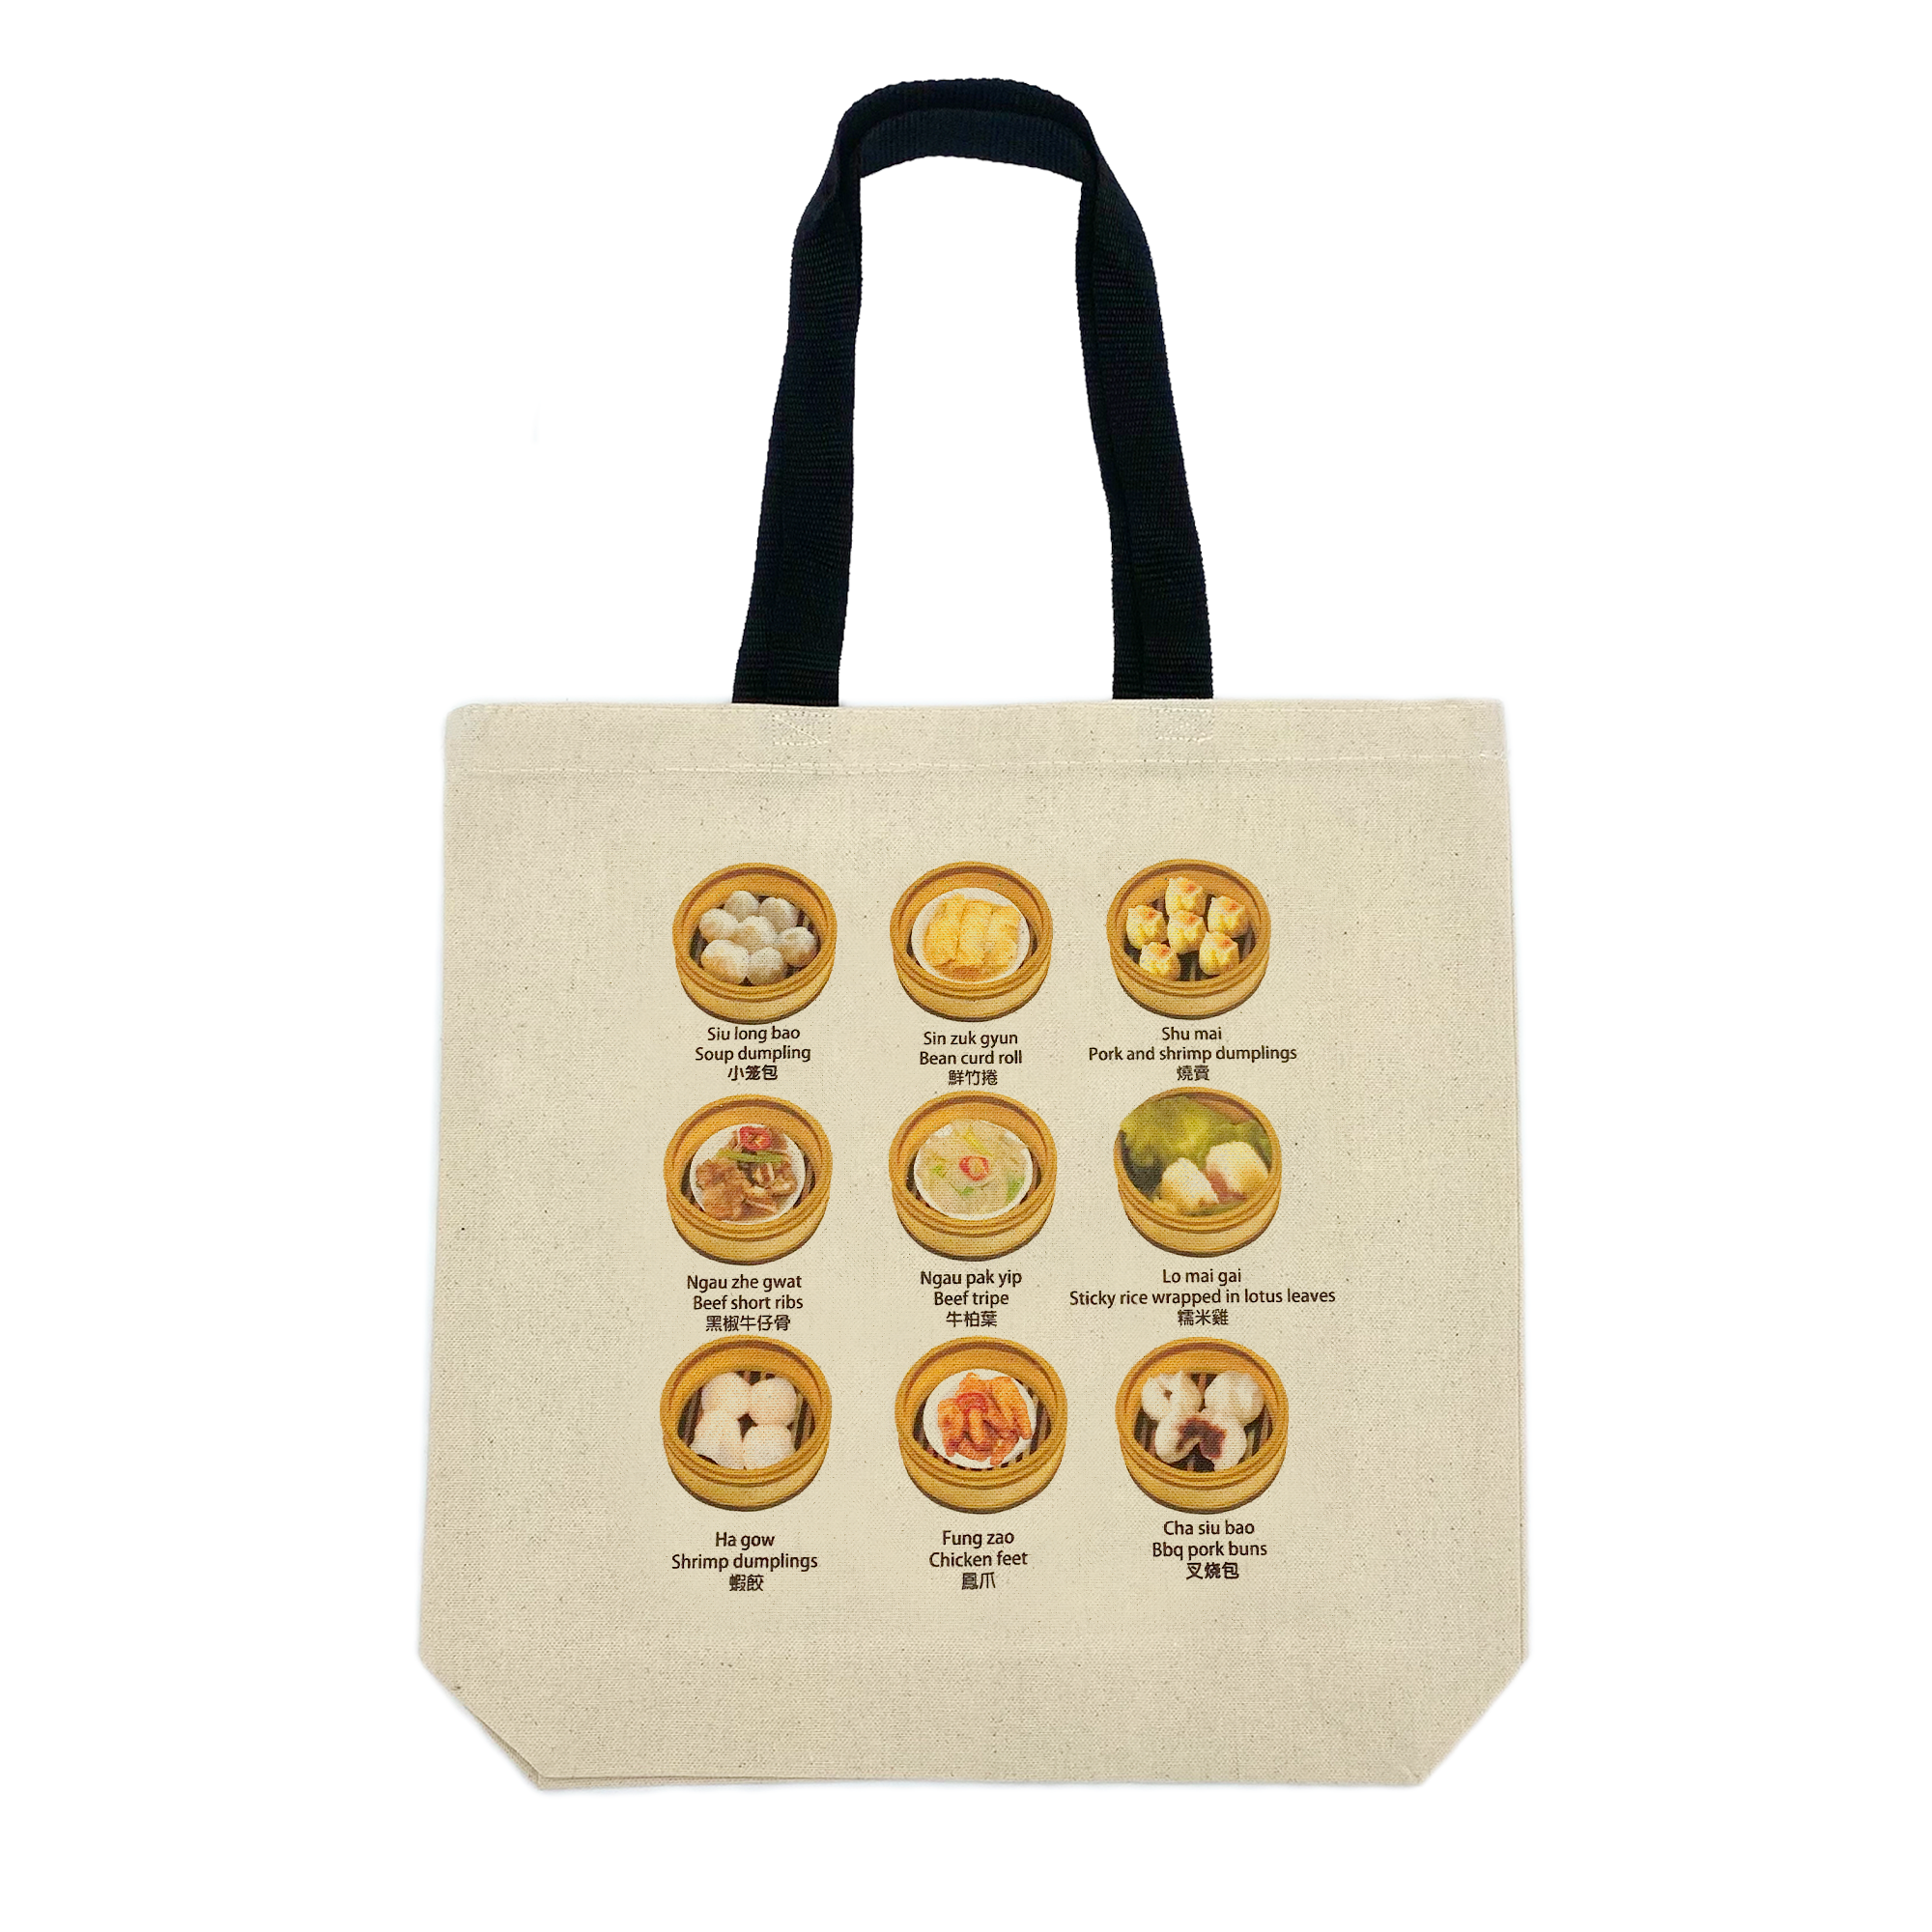 Let's Yum Cha Tote